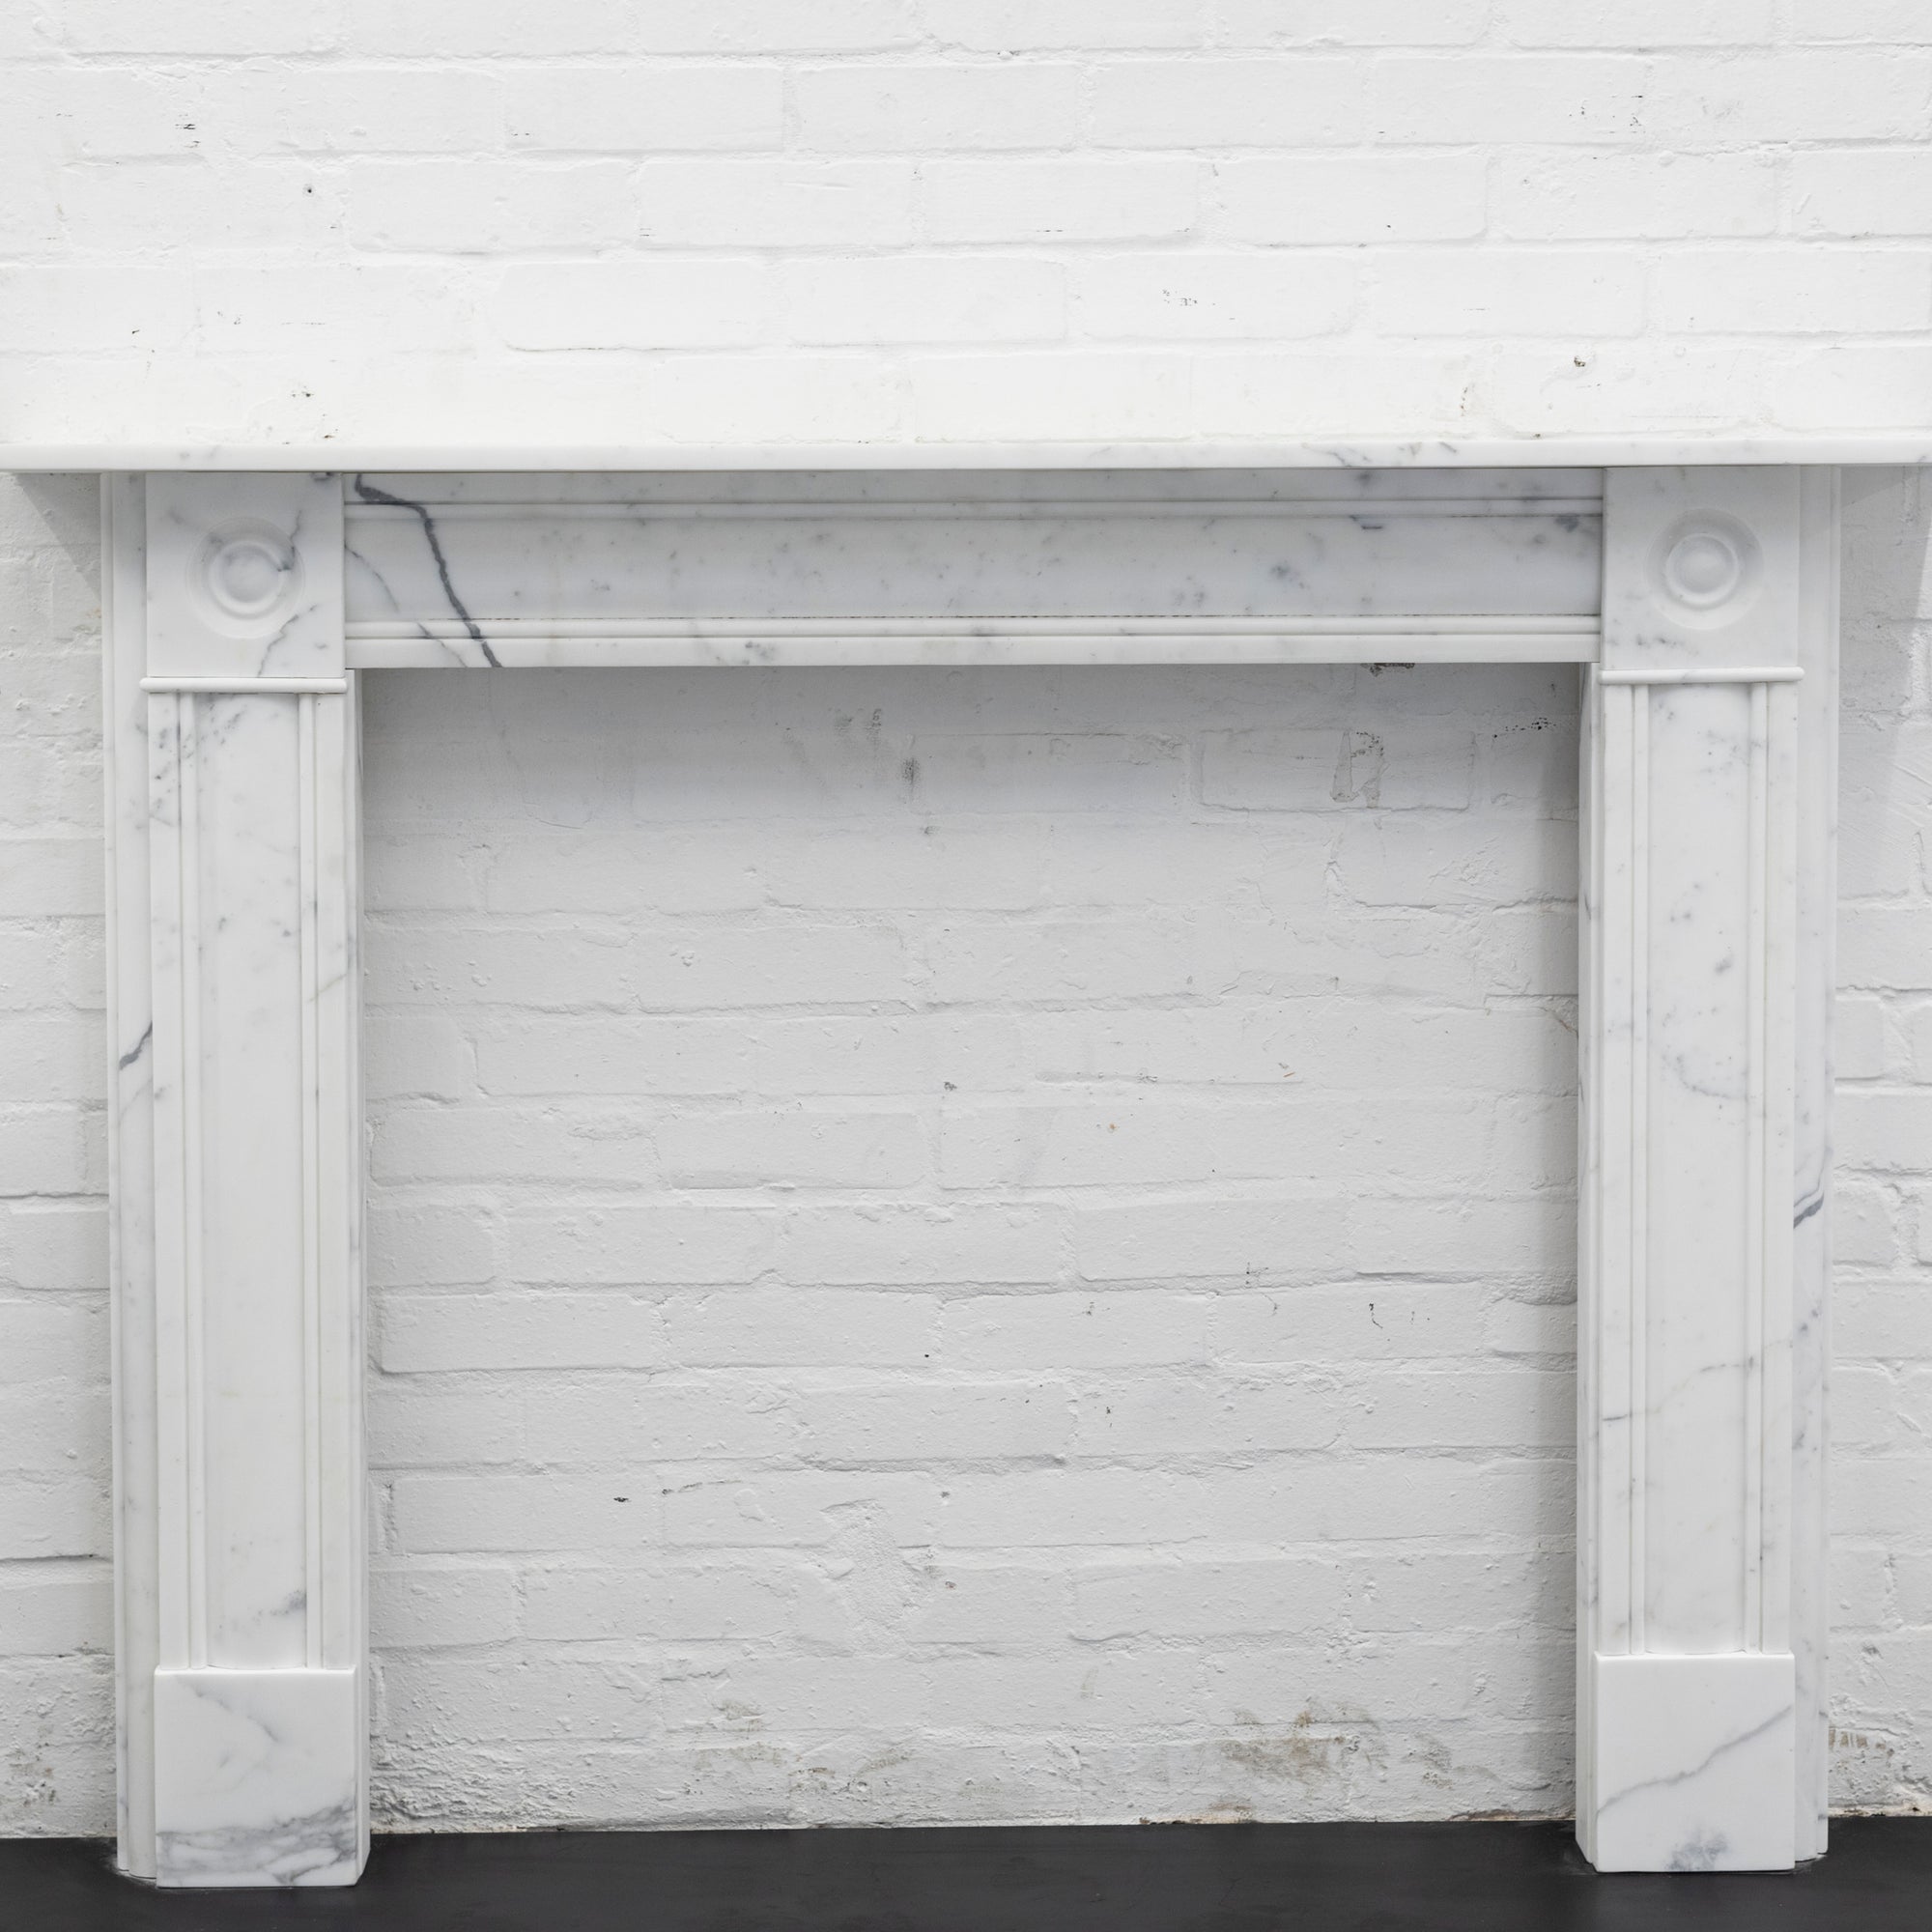 Georgian Style Fireplace Surround with Bullseyes | Reclaimed Carrara Marble | The Architectural Forum